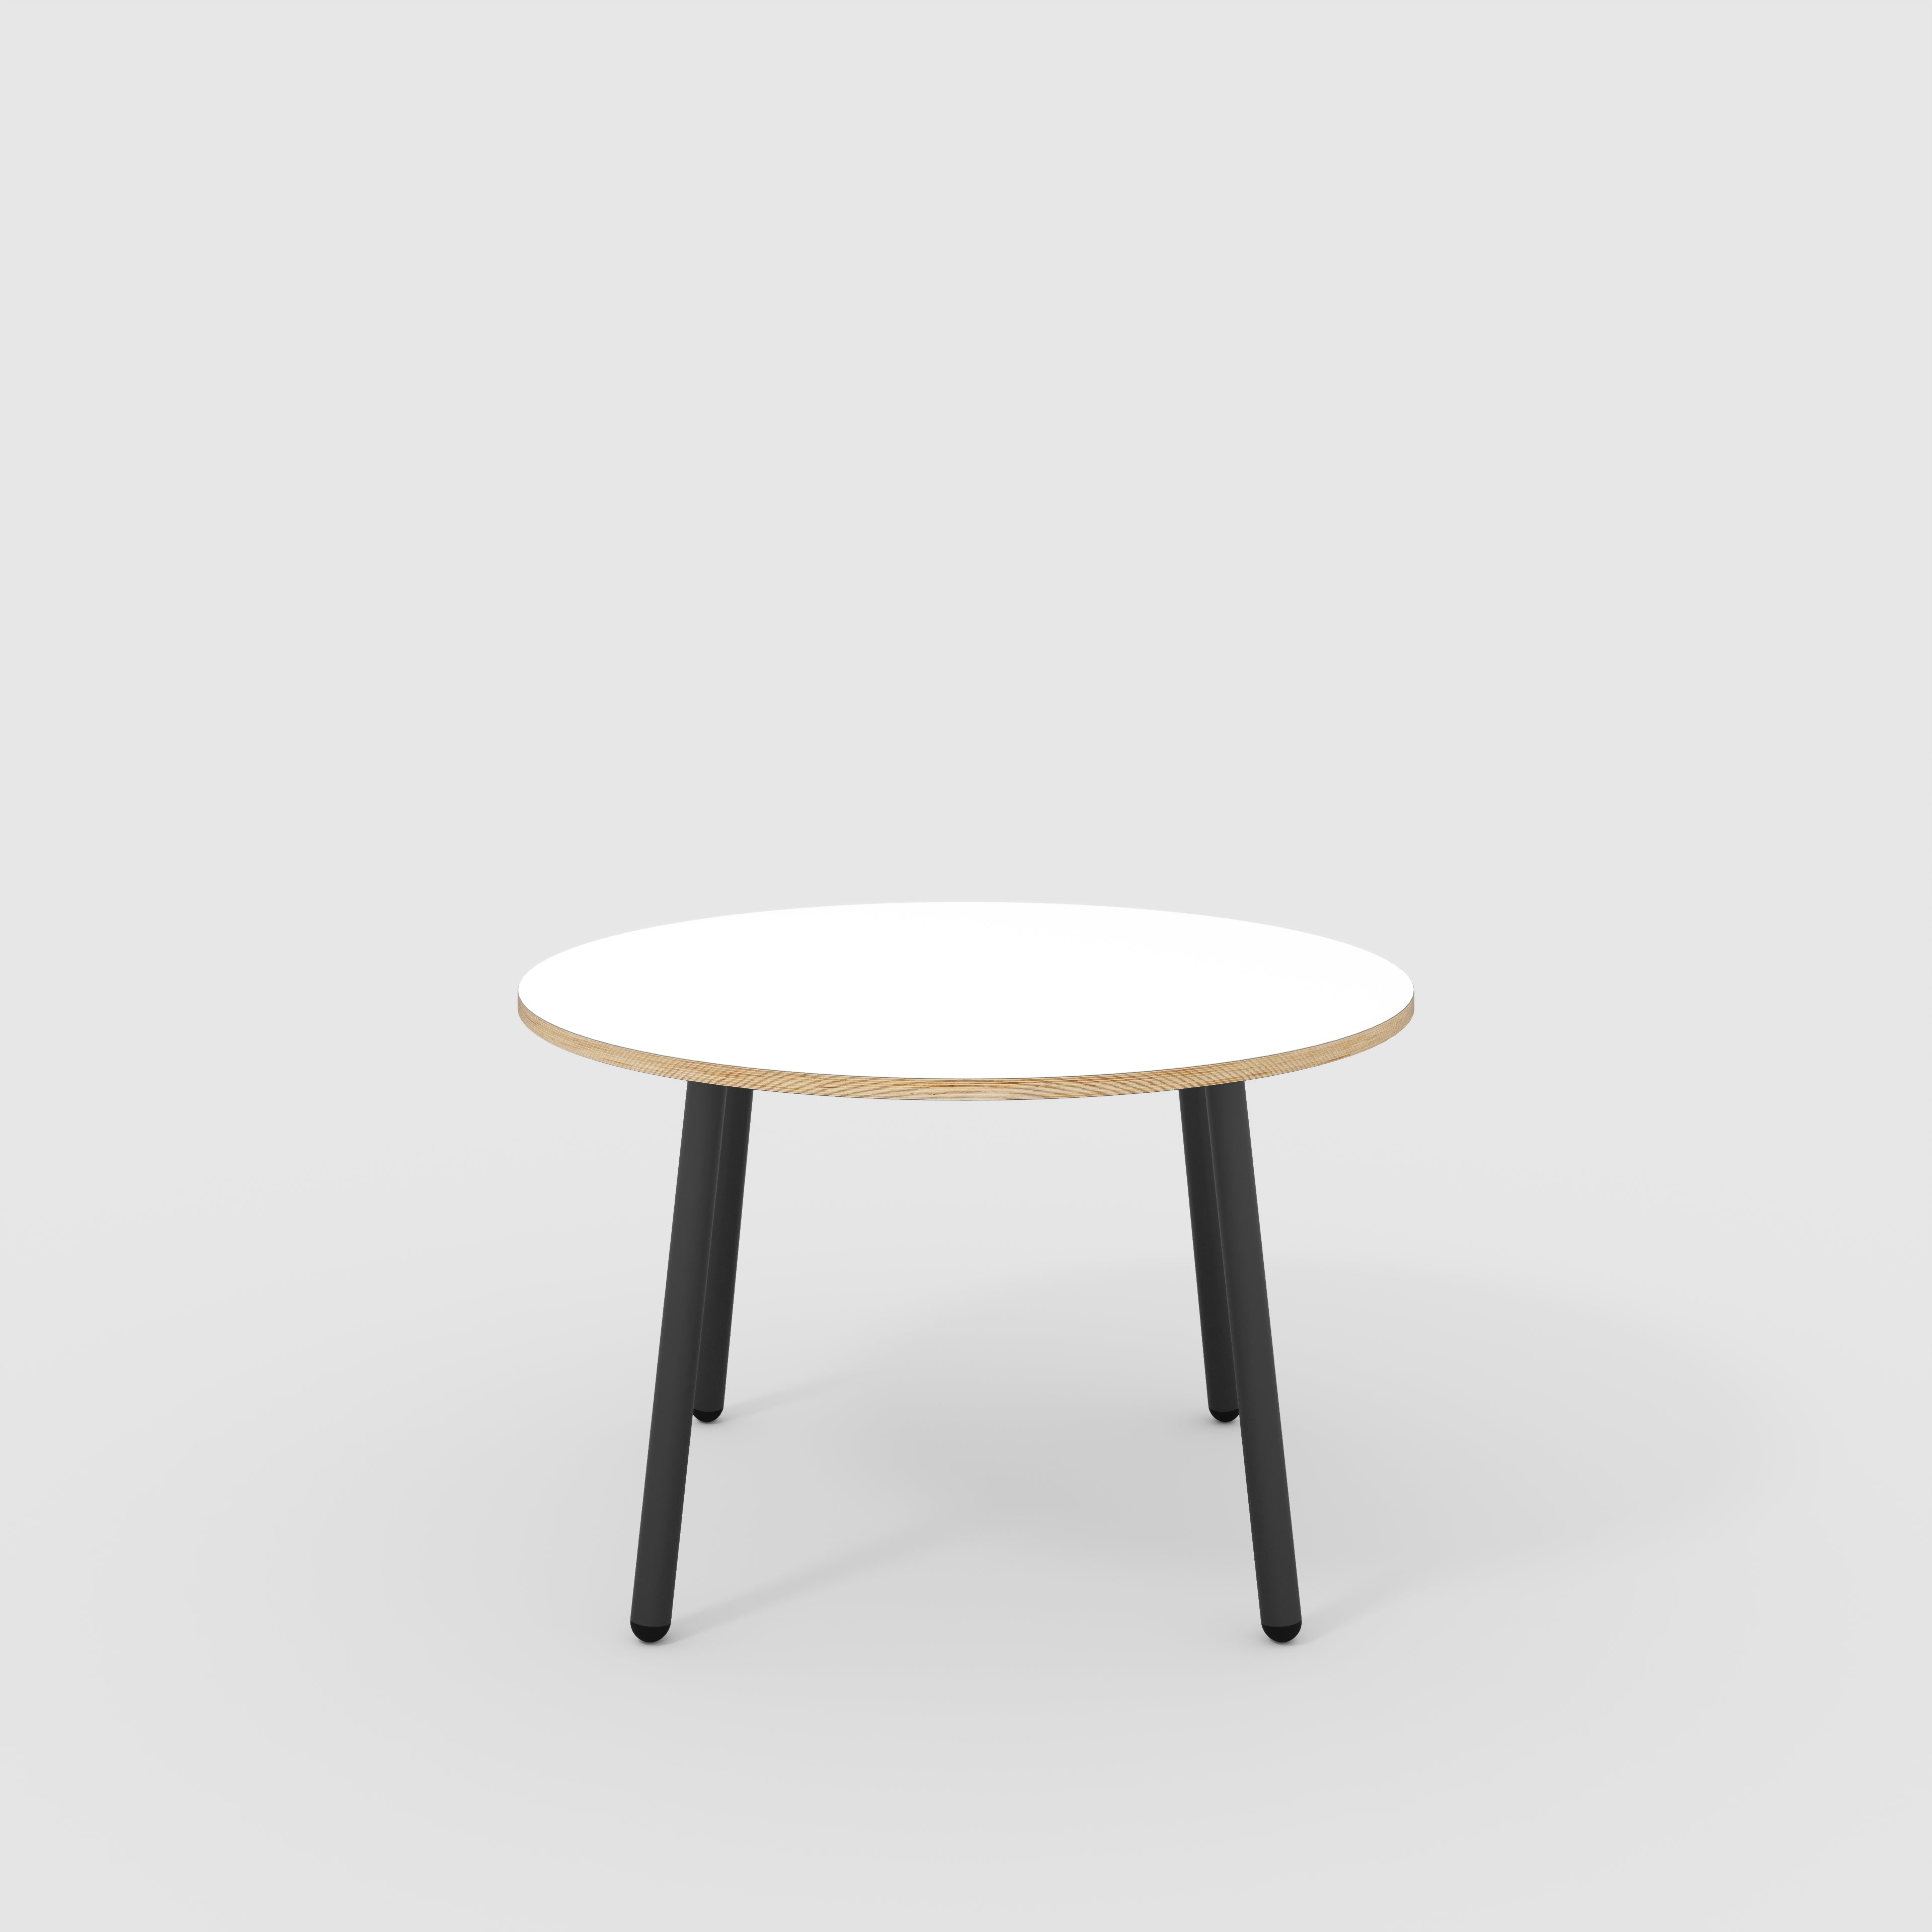 Round Table with Black Round Single Pin Legs - Formica White - 1200(dia) x 735(h)